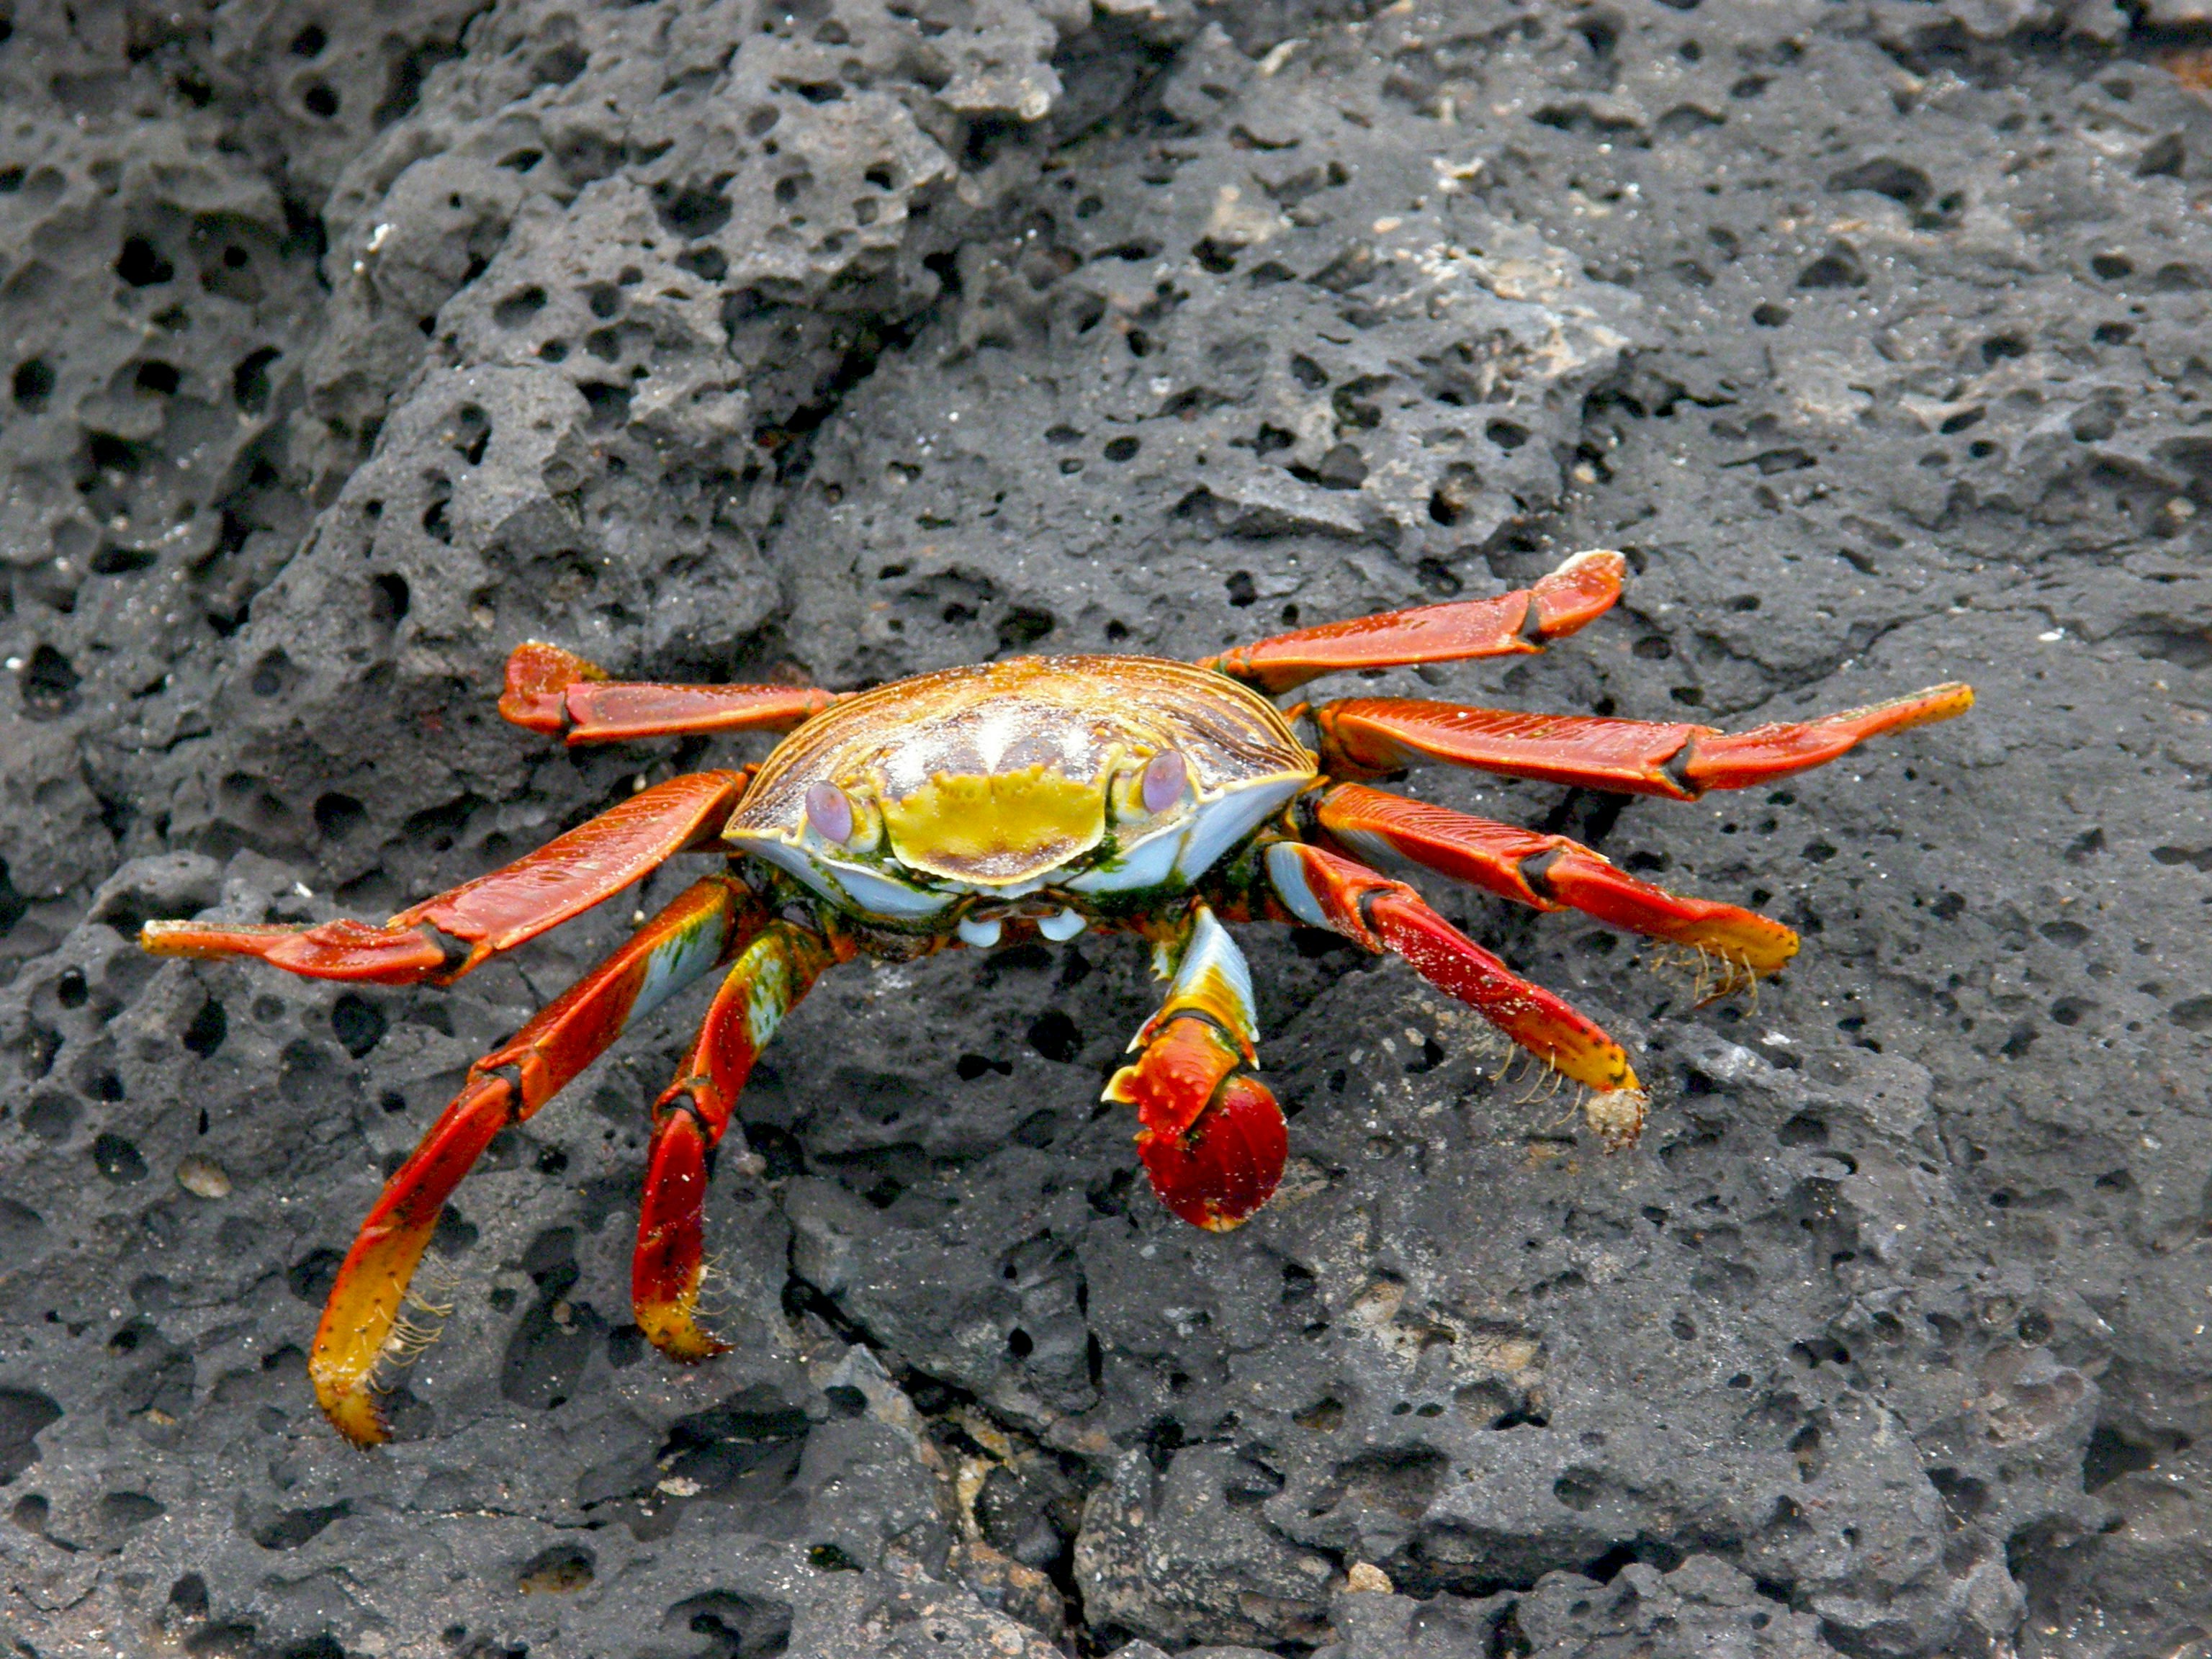 A brightly colored crab sits still on black volcanic rocks